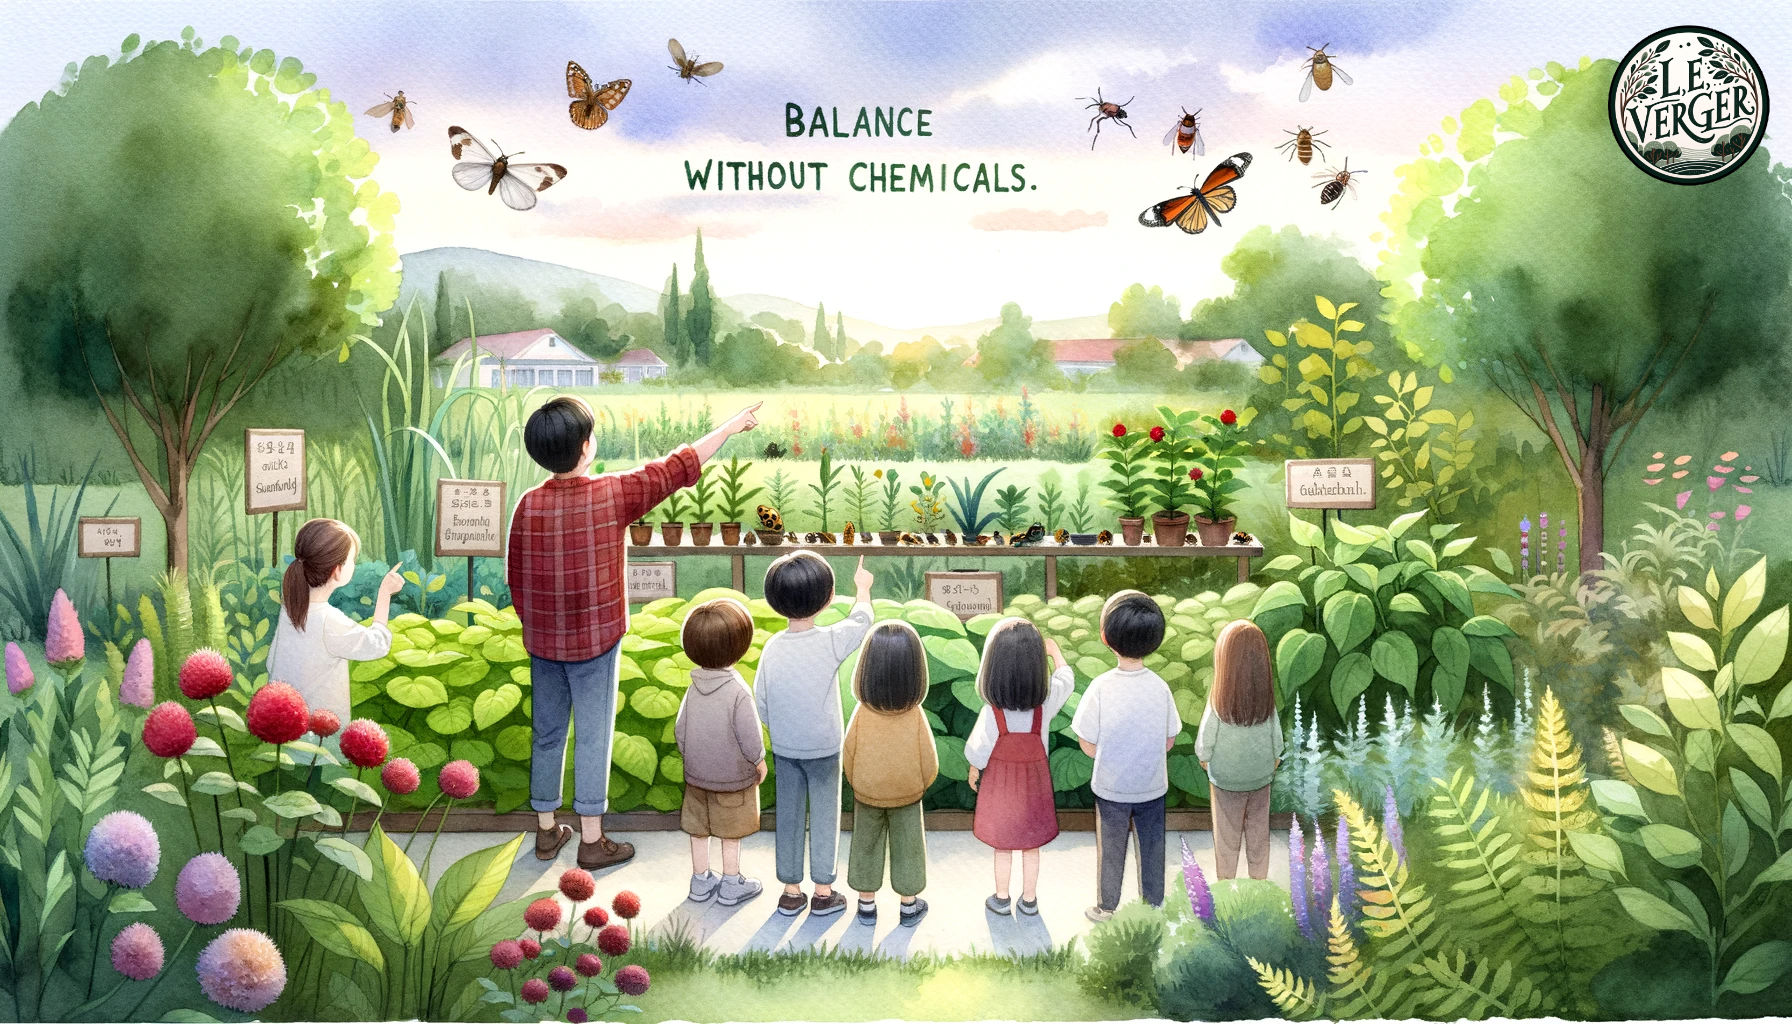 Watercolour Painting: A serene garden with children and adults observing and pointing at various beneficial insects. Plants look healthy and vibrant. The sky above has a soft glow with the words 'Balance Without Chemicals' written in the clouds.